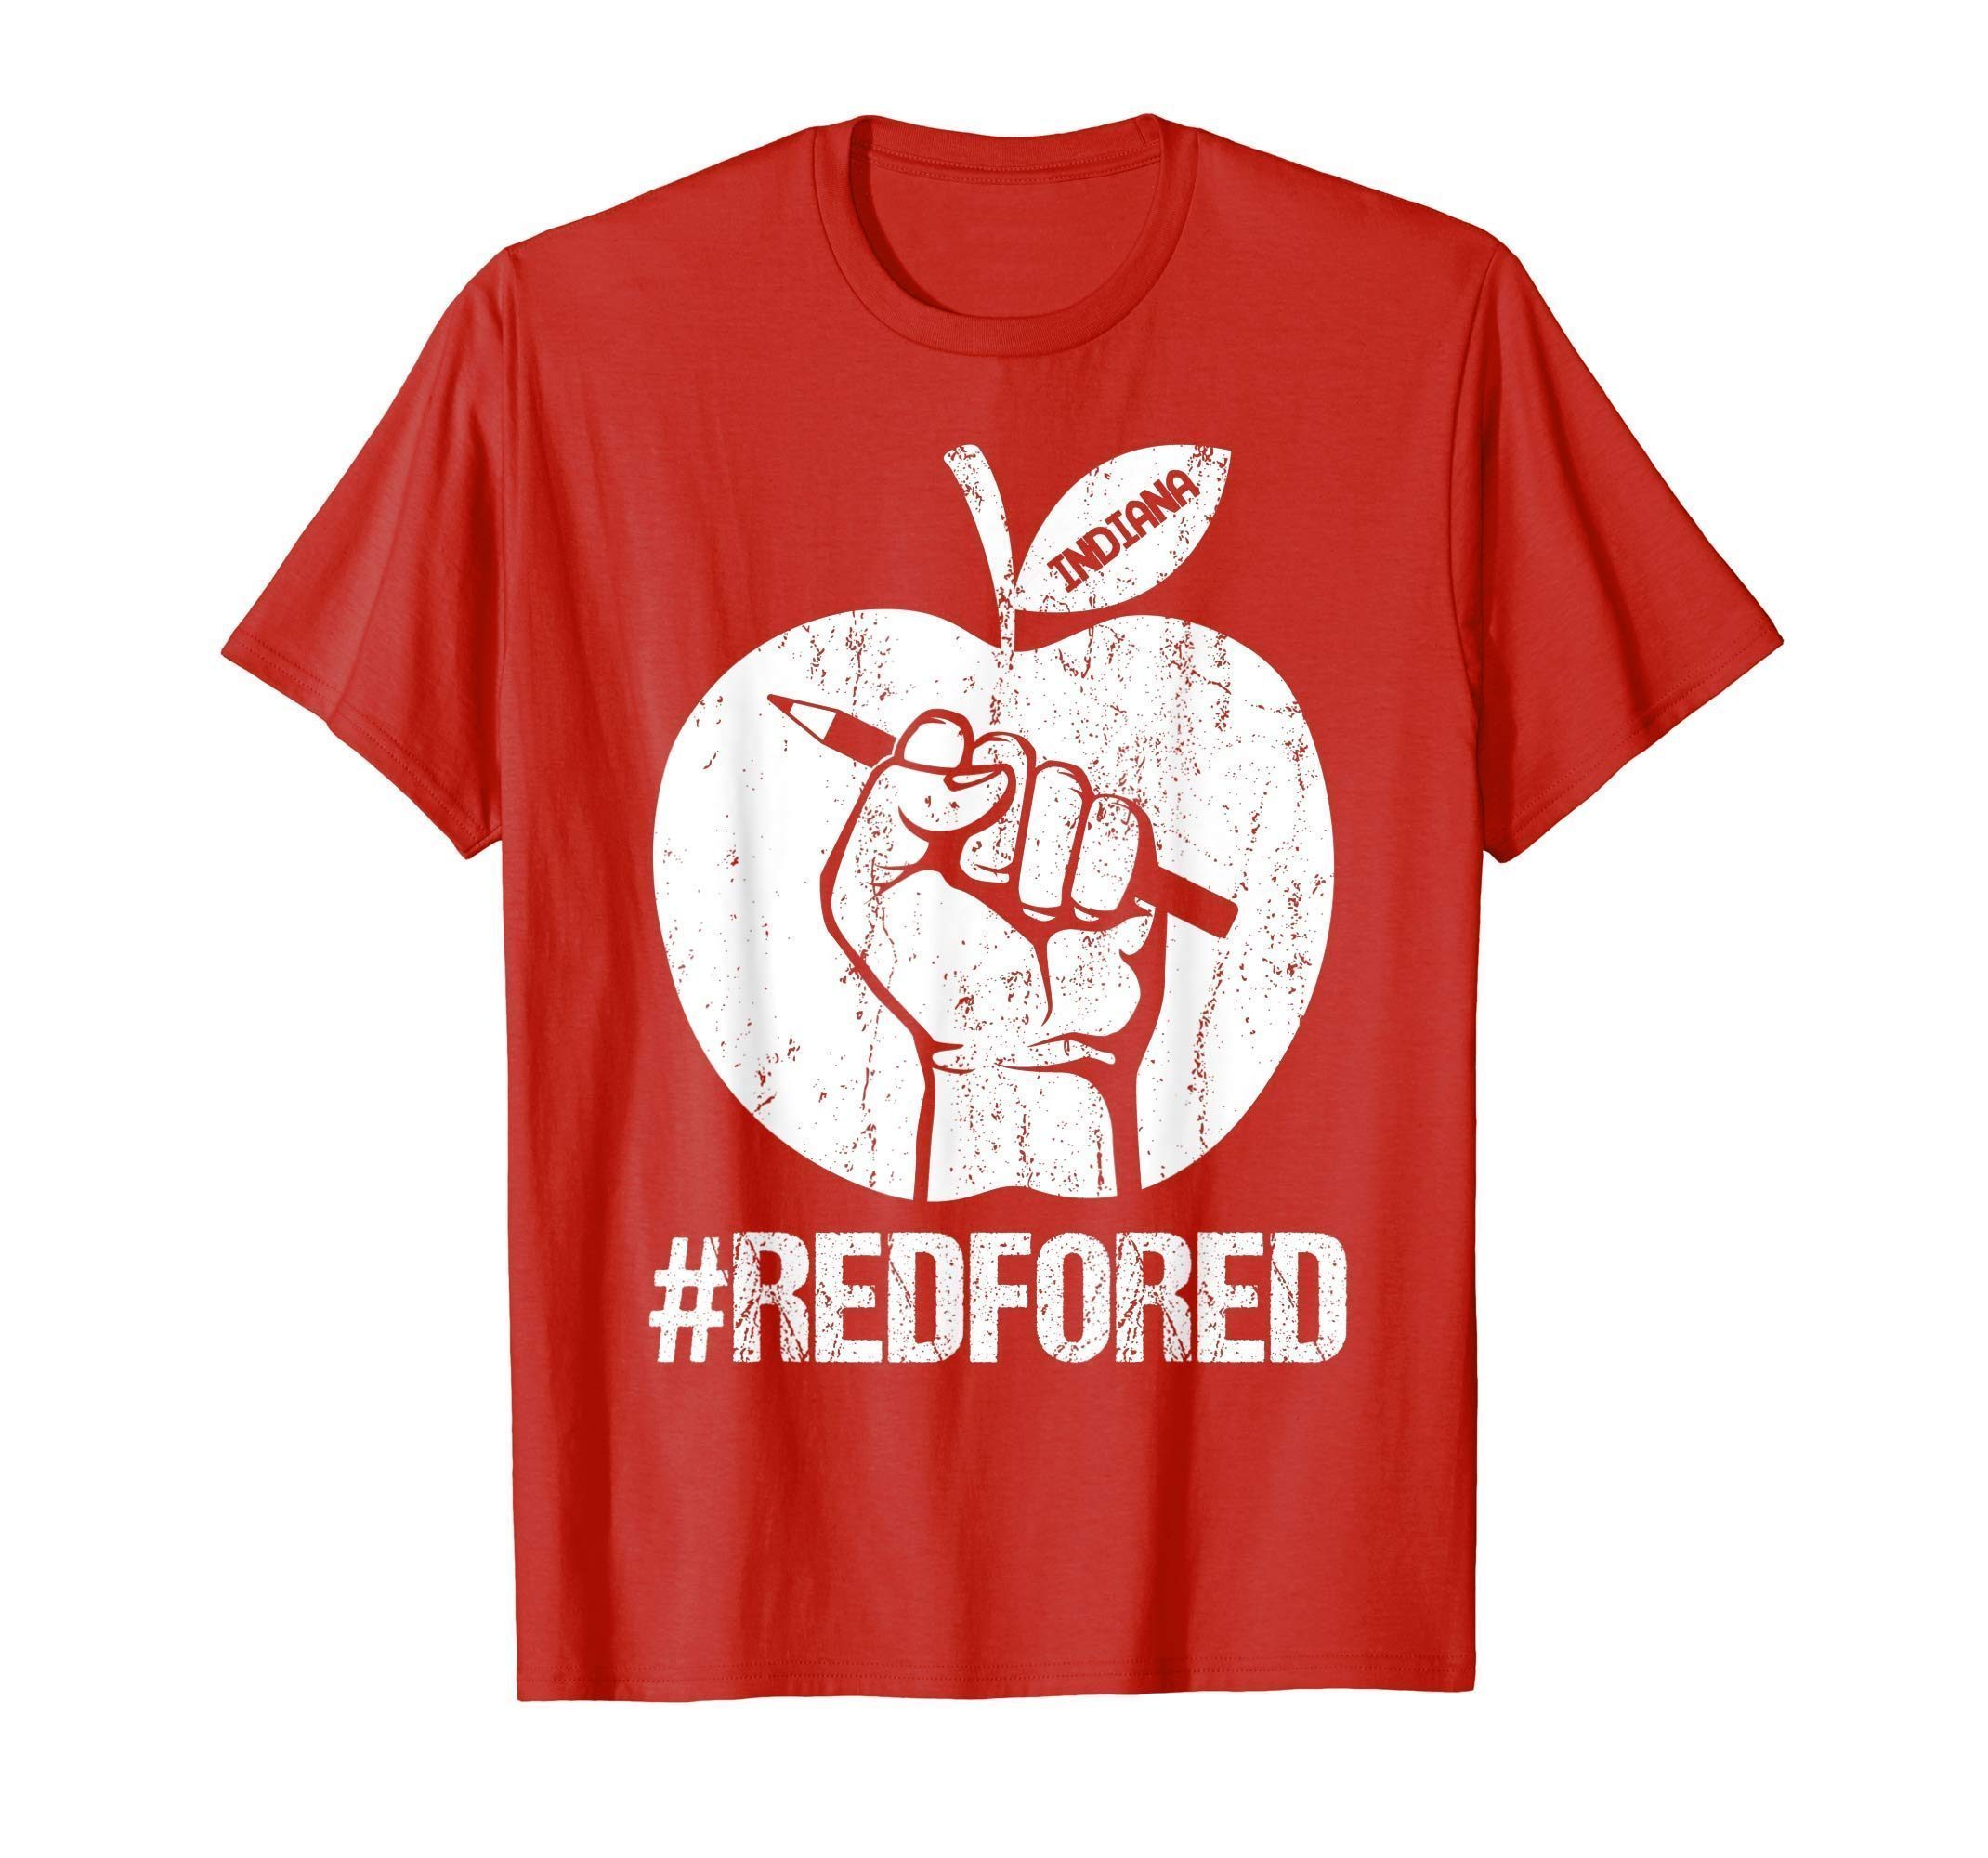 red for ed shirts